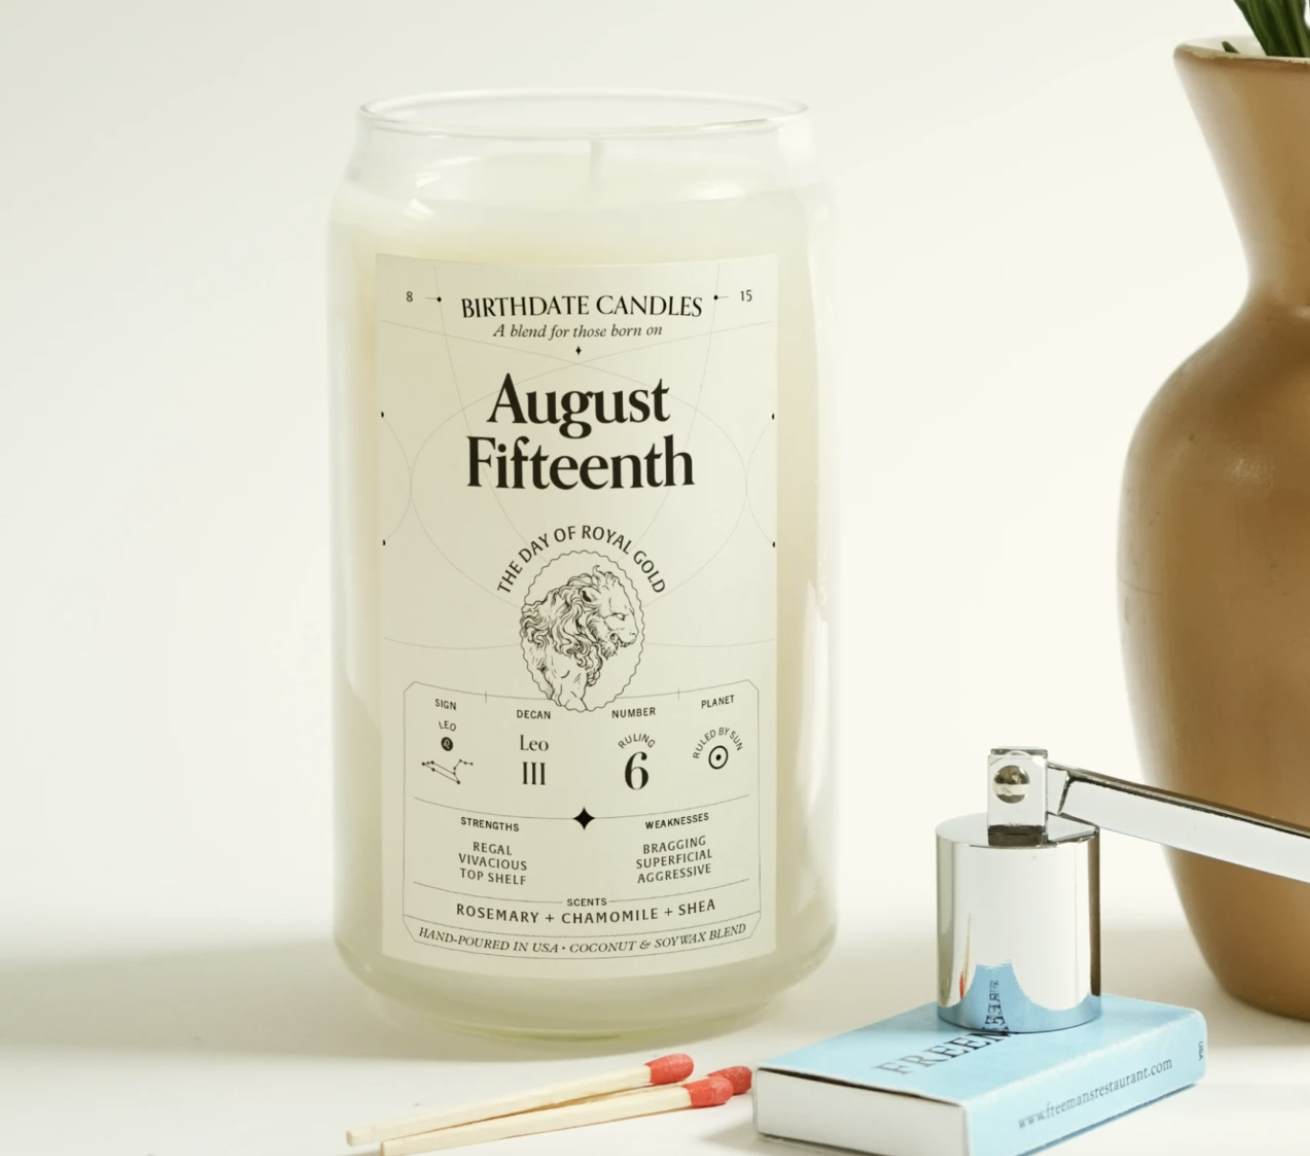 An image of the August Fifteenth birthday candle